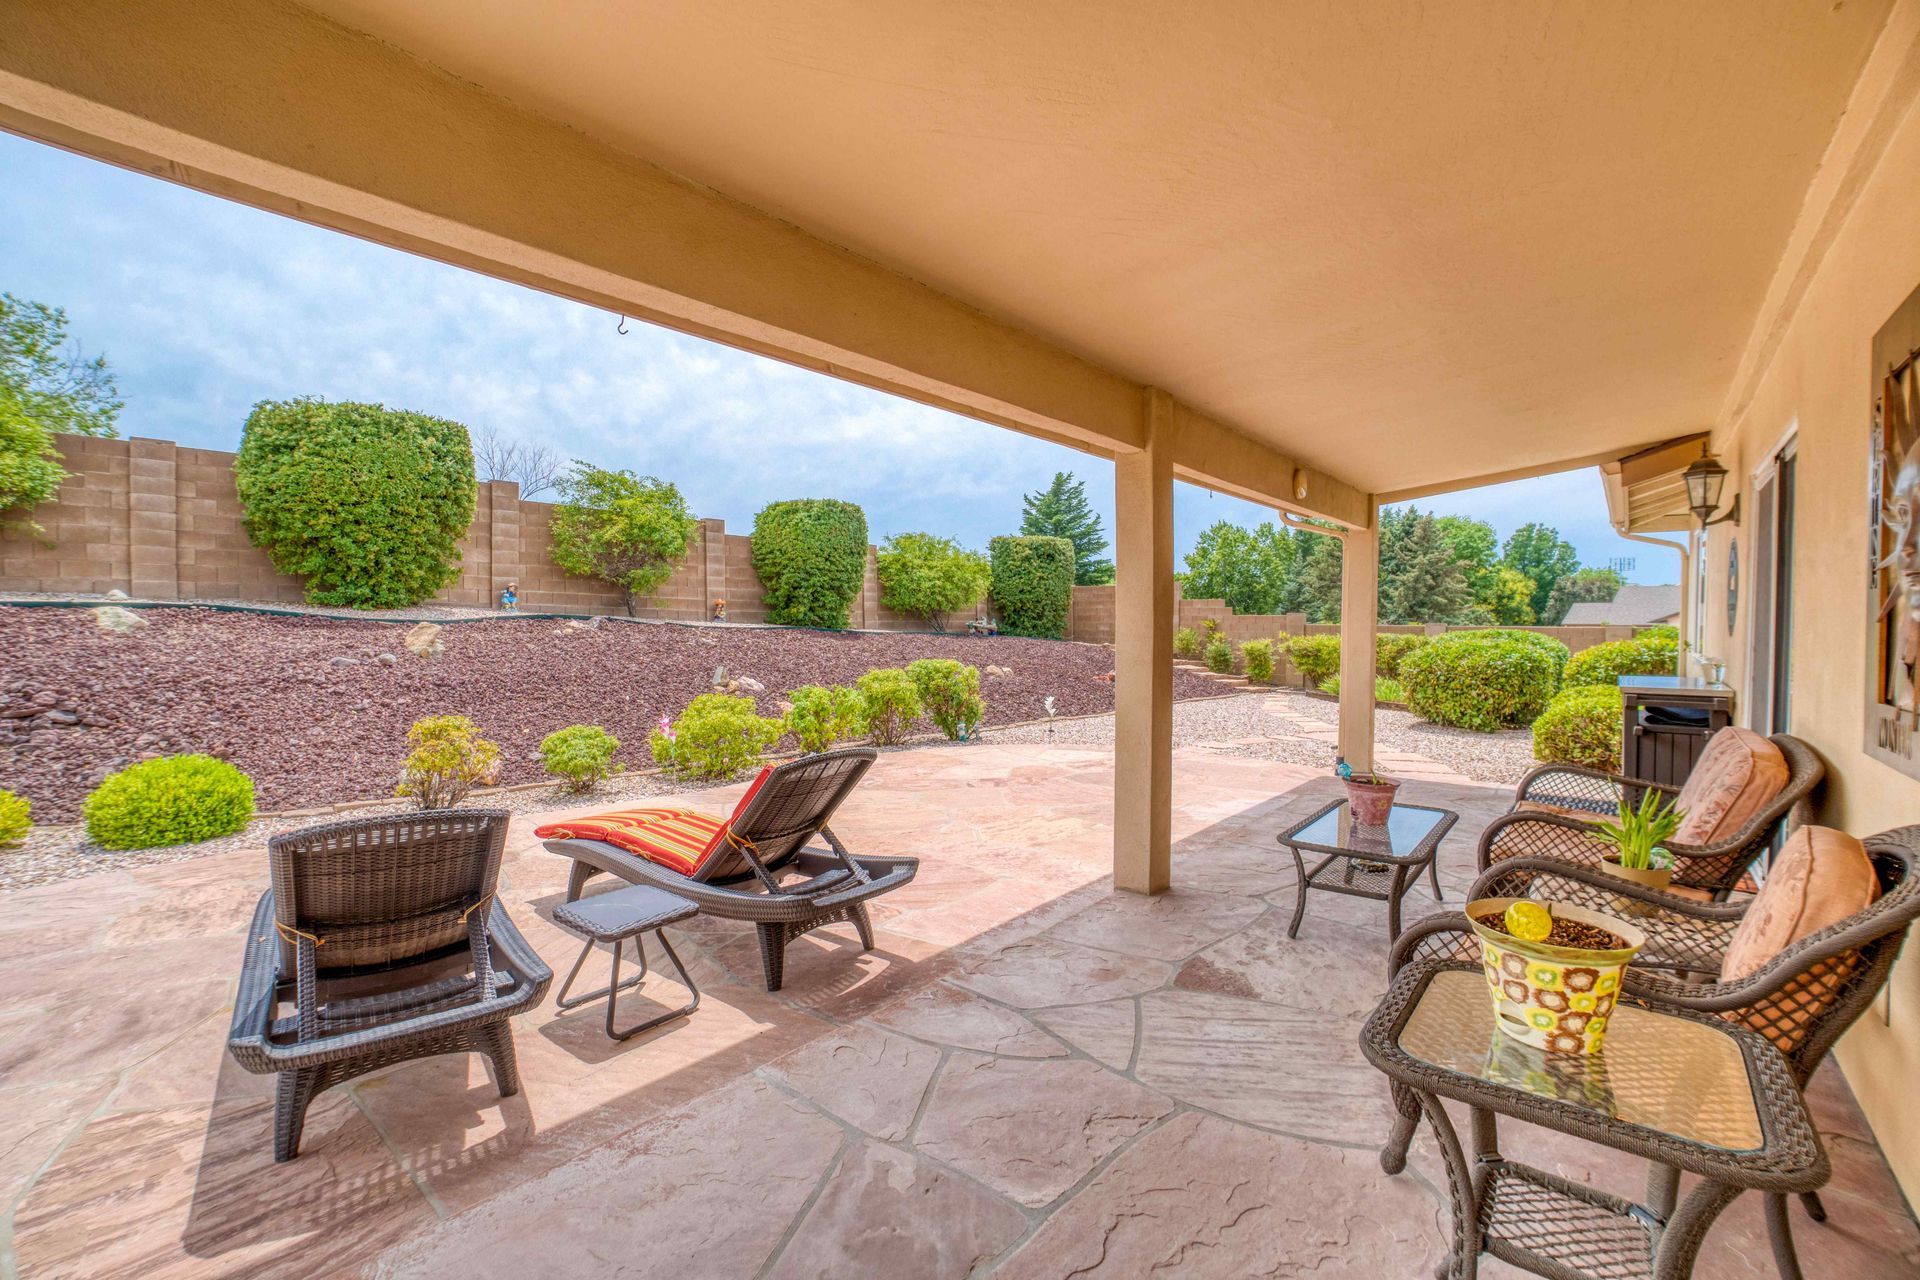 Outdoor living space with a fully landscaped yard by Affordable Landscapes Carson City